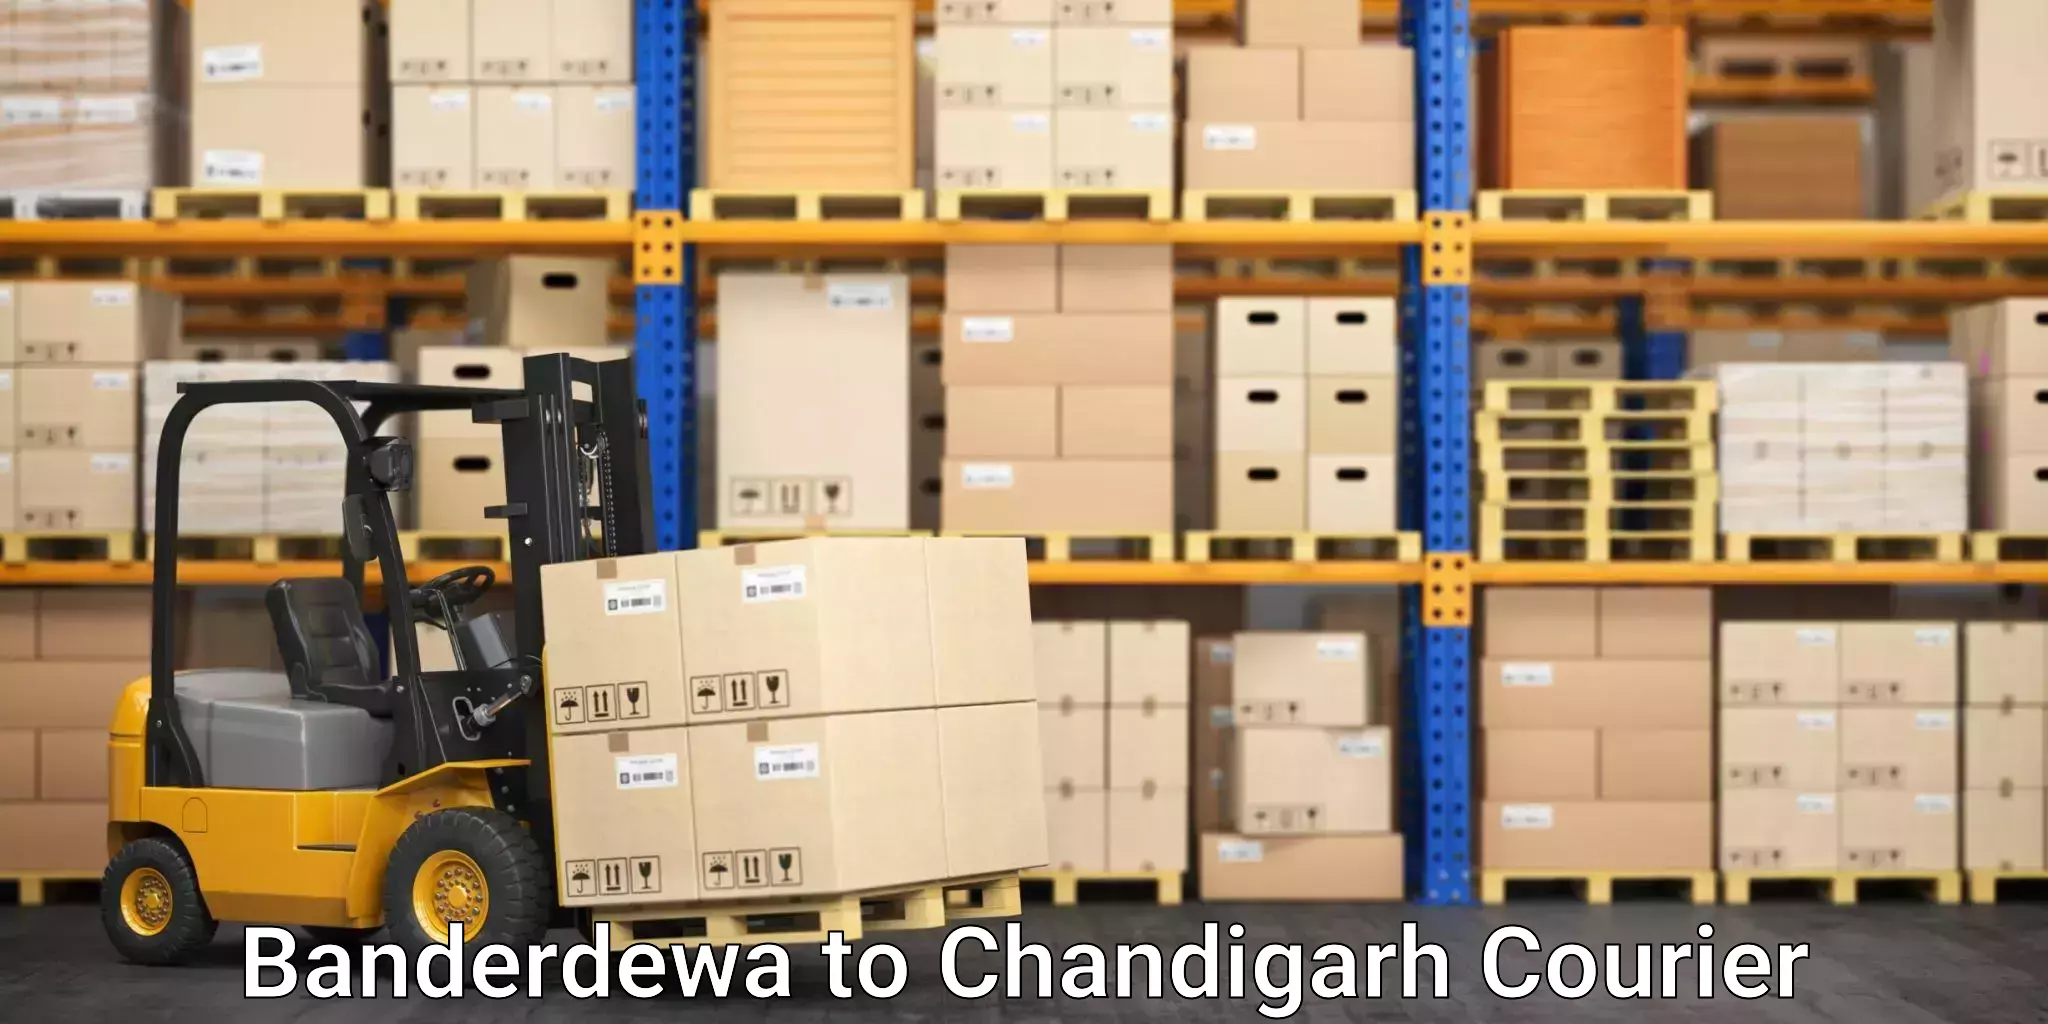 Parcel delivery automation Banderdewa to Chandigarh